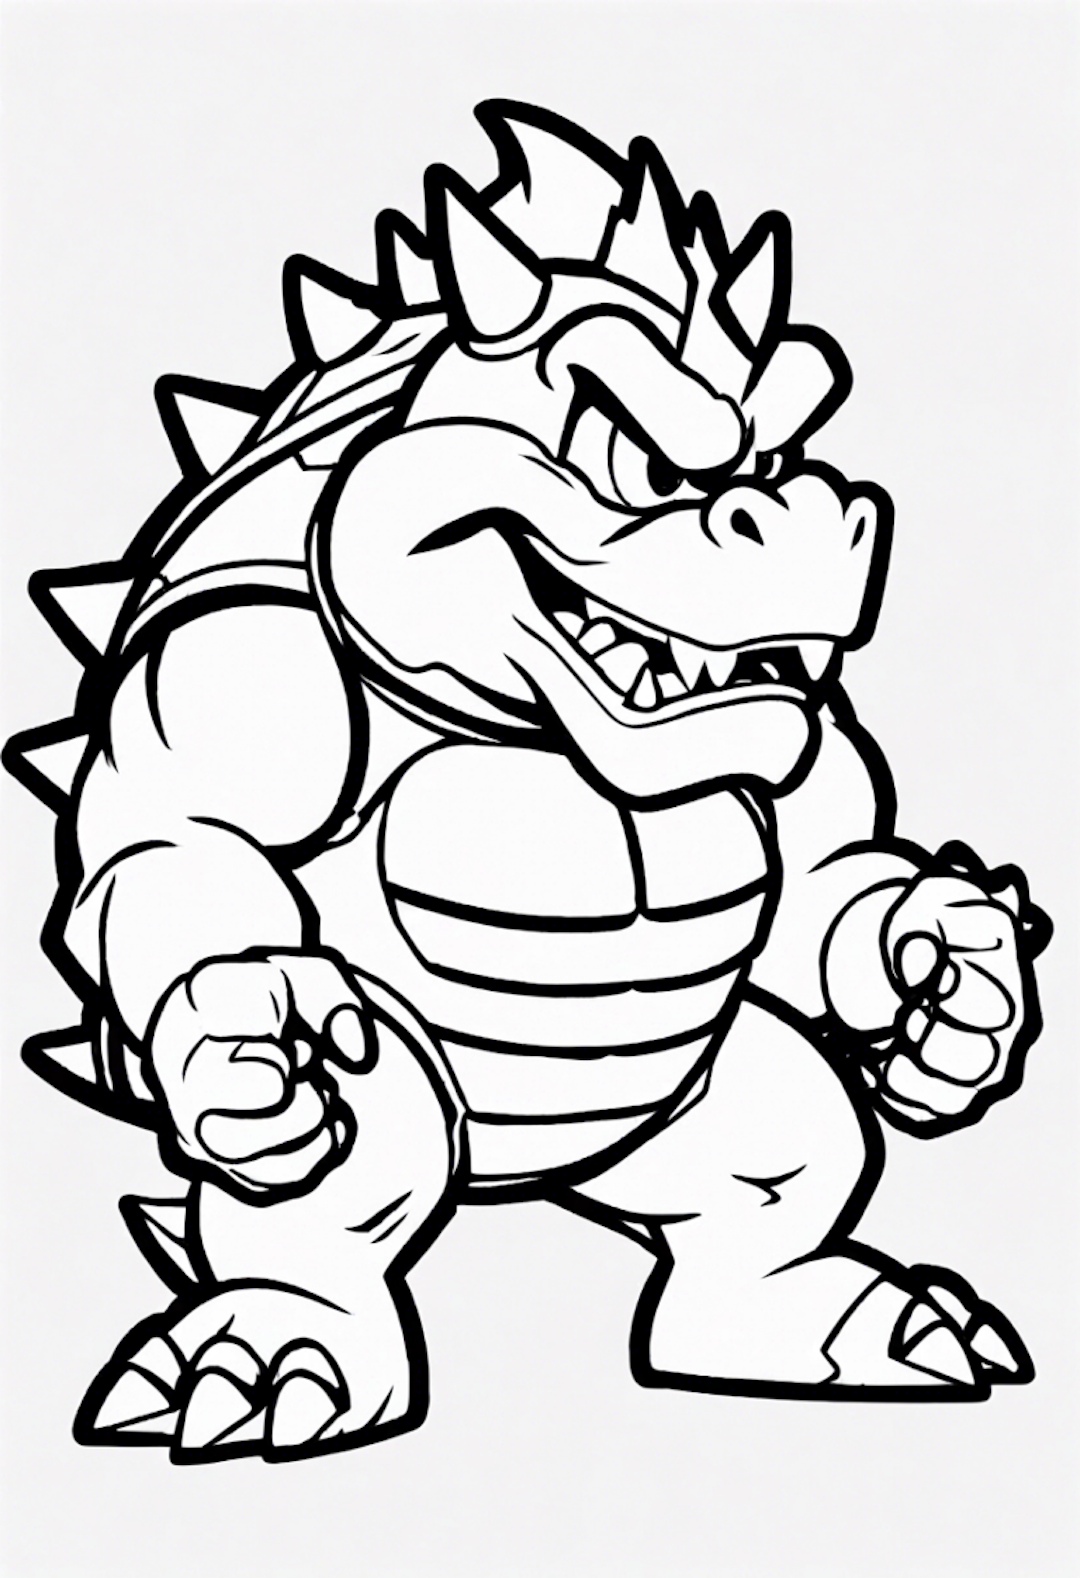 Bowser’s Mighty Stance Coloring Page coloring pages